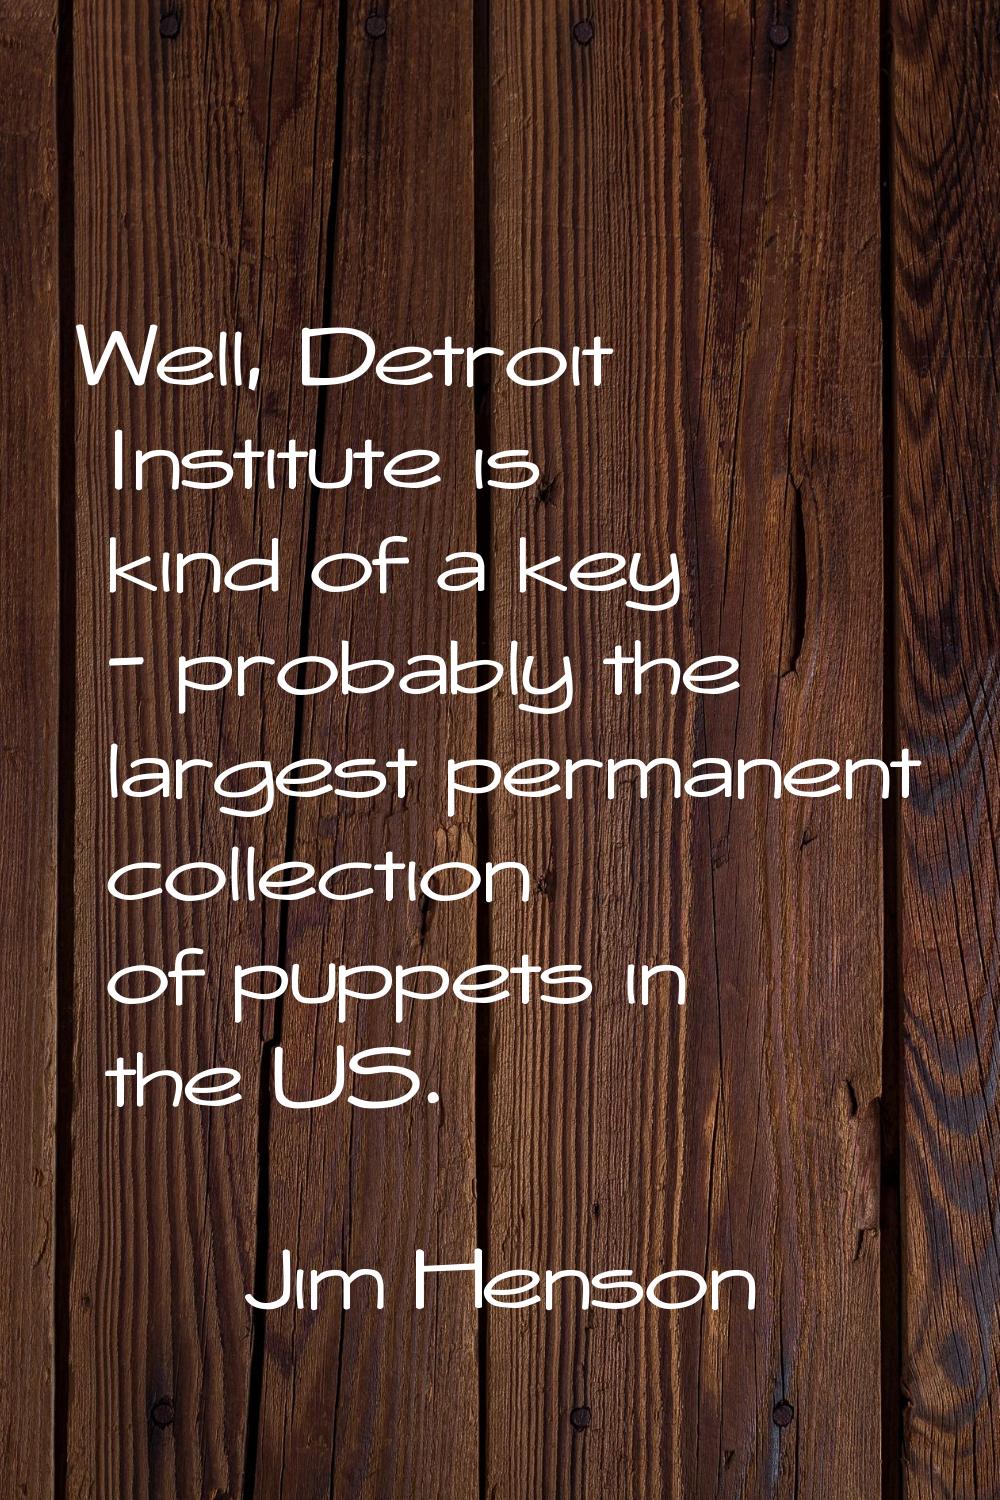 Well, Detroit Institute is kind of a key - probably the largest permanent collection of puppets in 